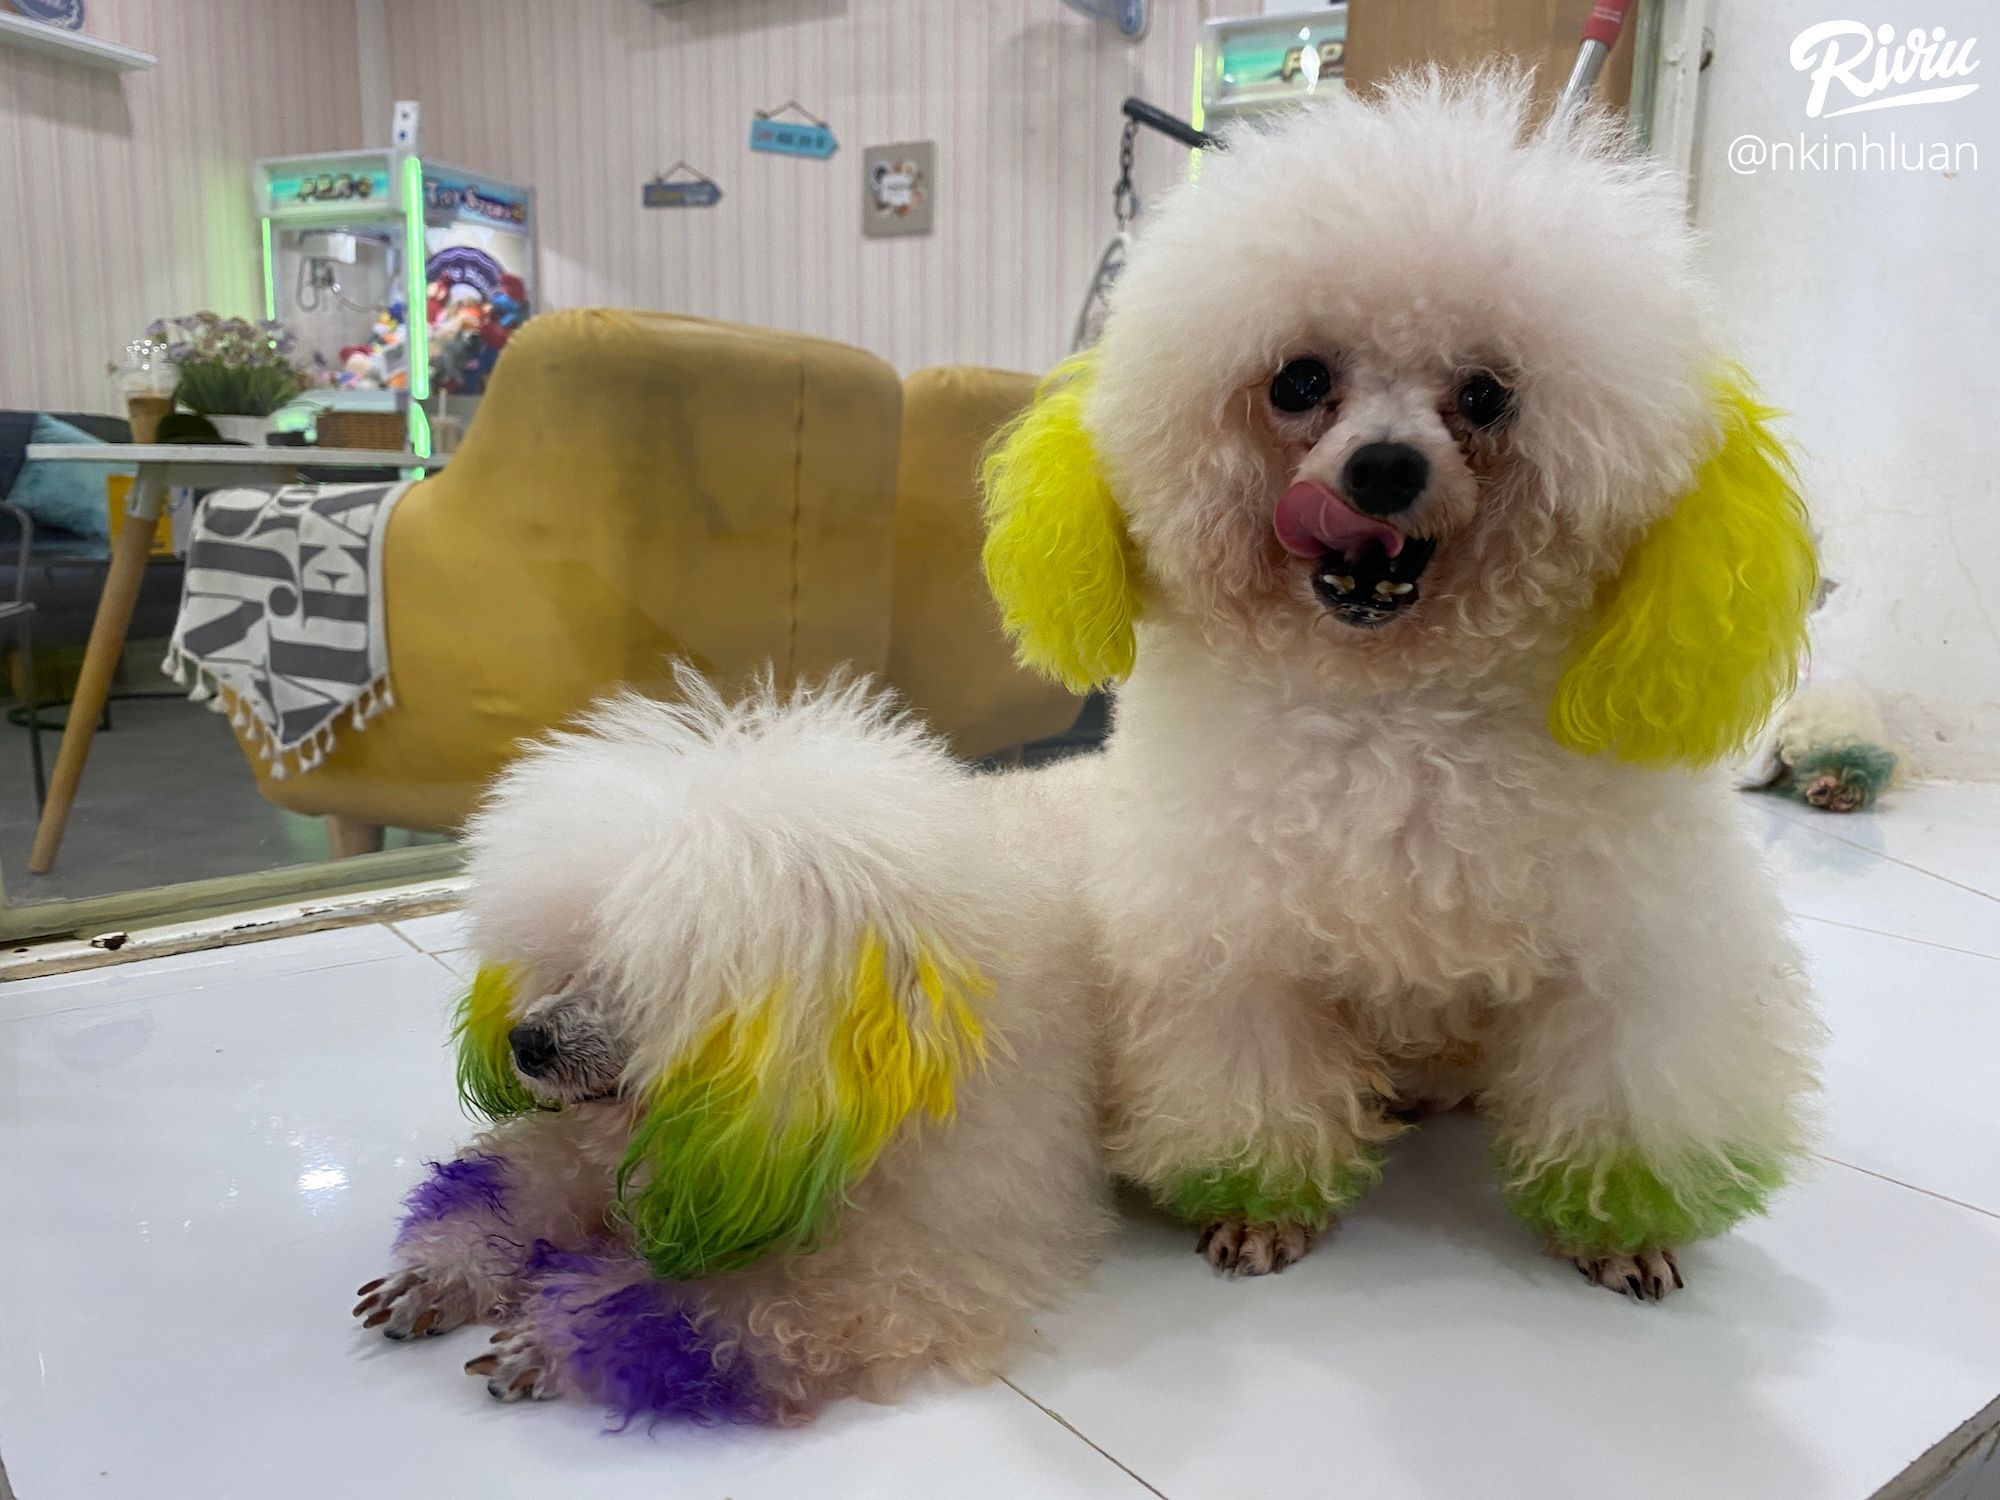 ghe quan poodle house coffee choi voi may chu cho vo cung de thuong - anh 2